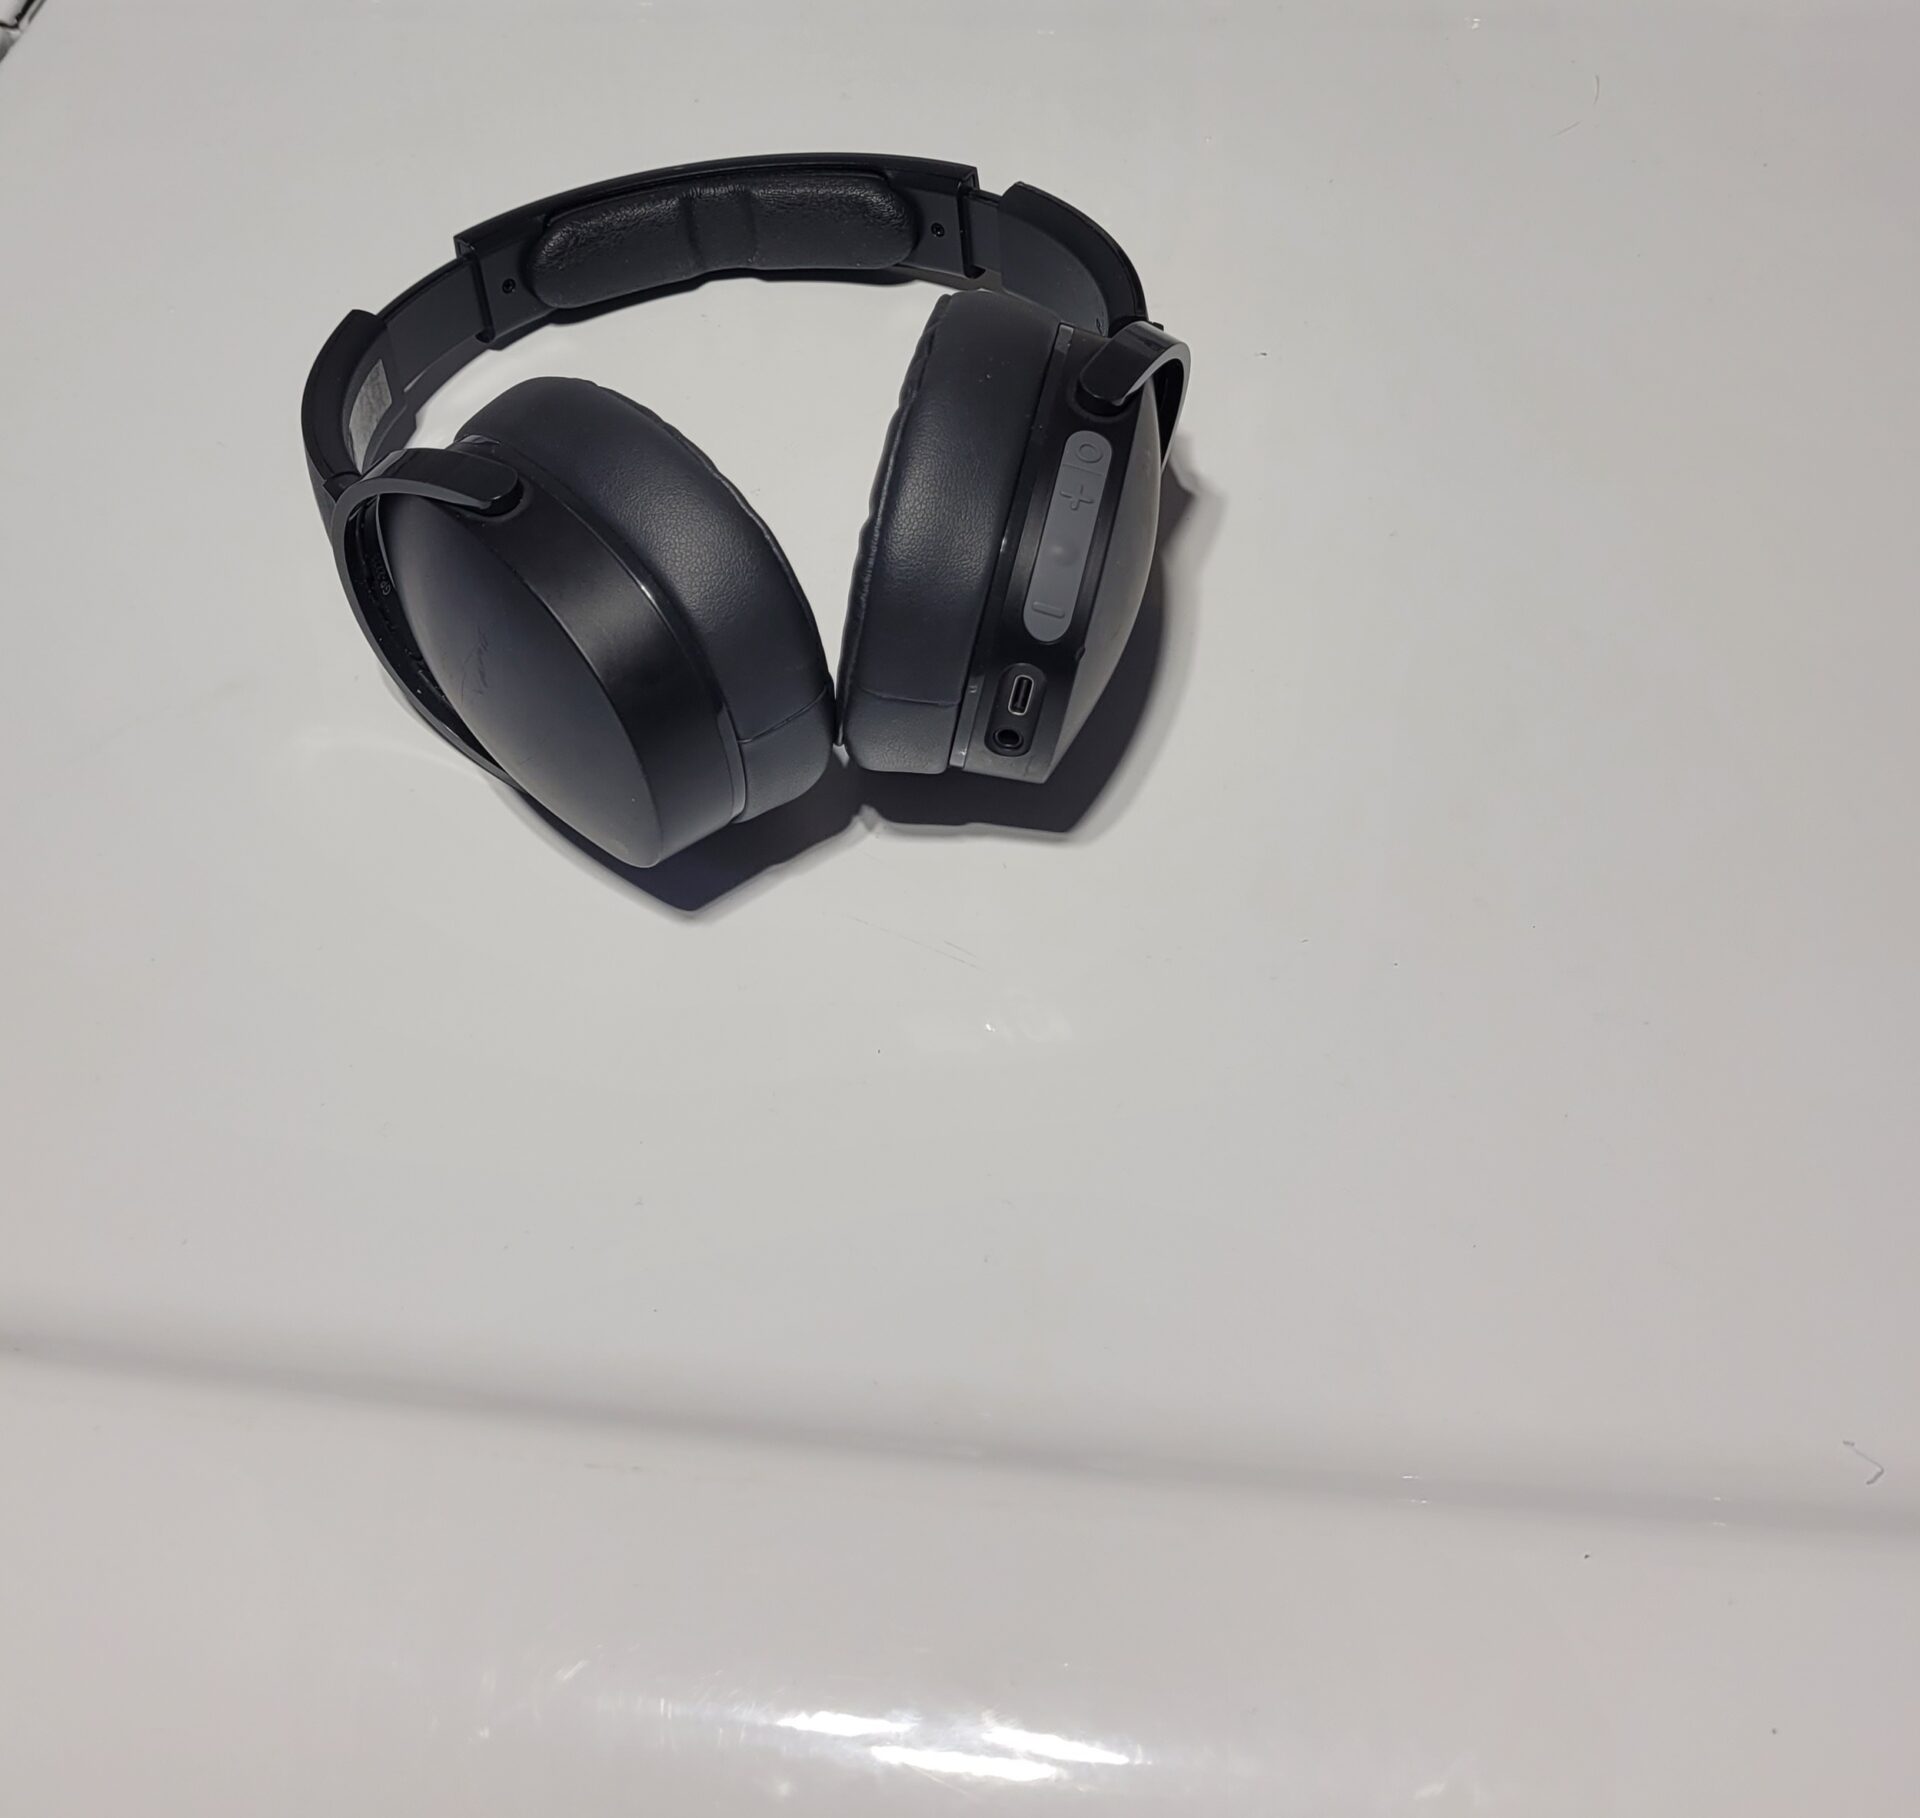 An image of headphones on a white backdrop as an example for Mobile DJ services number 80 on our list of backyard business ideas